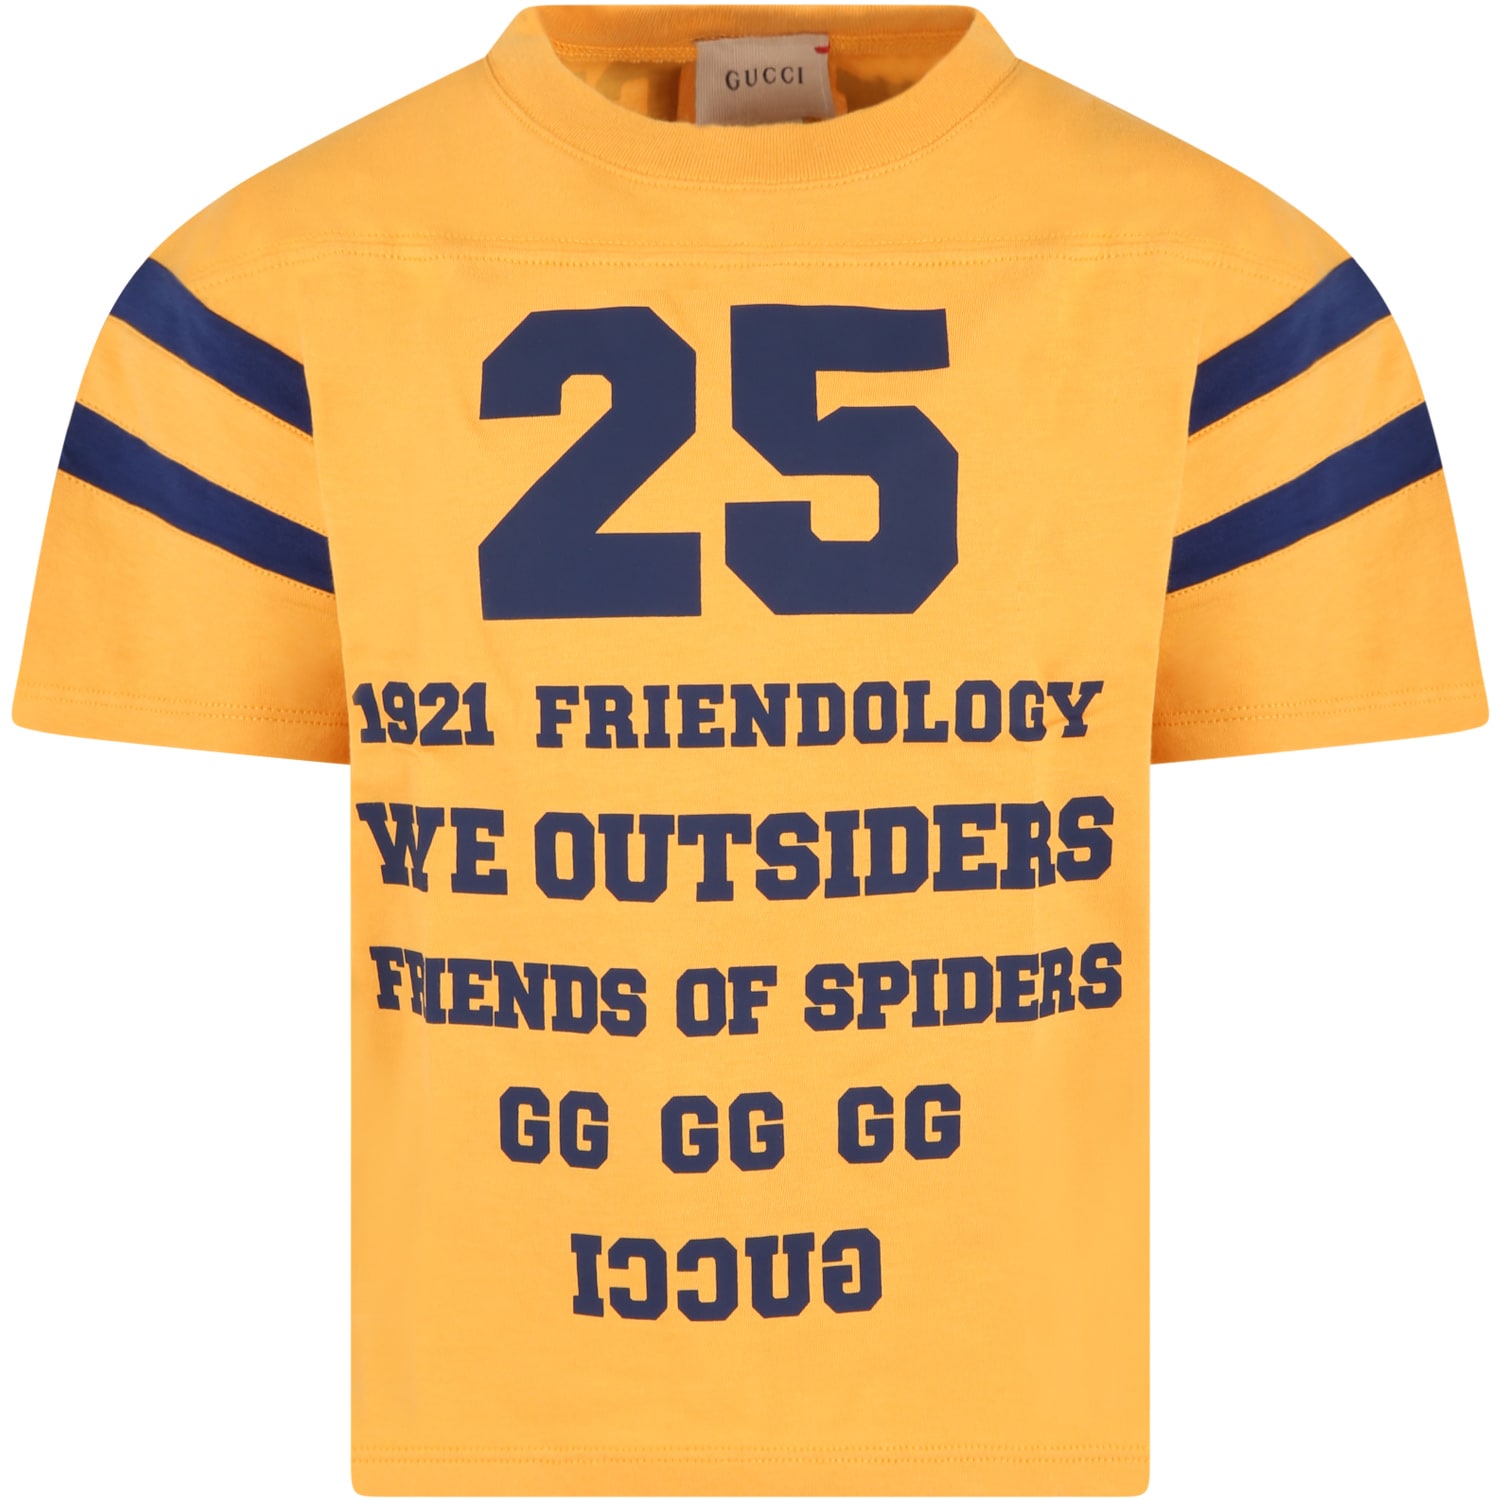 Gucci Yellow T-shirt For Kids With Friendology Writing And Logo